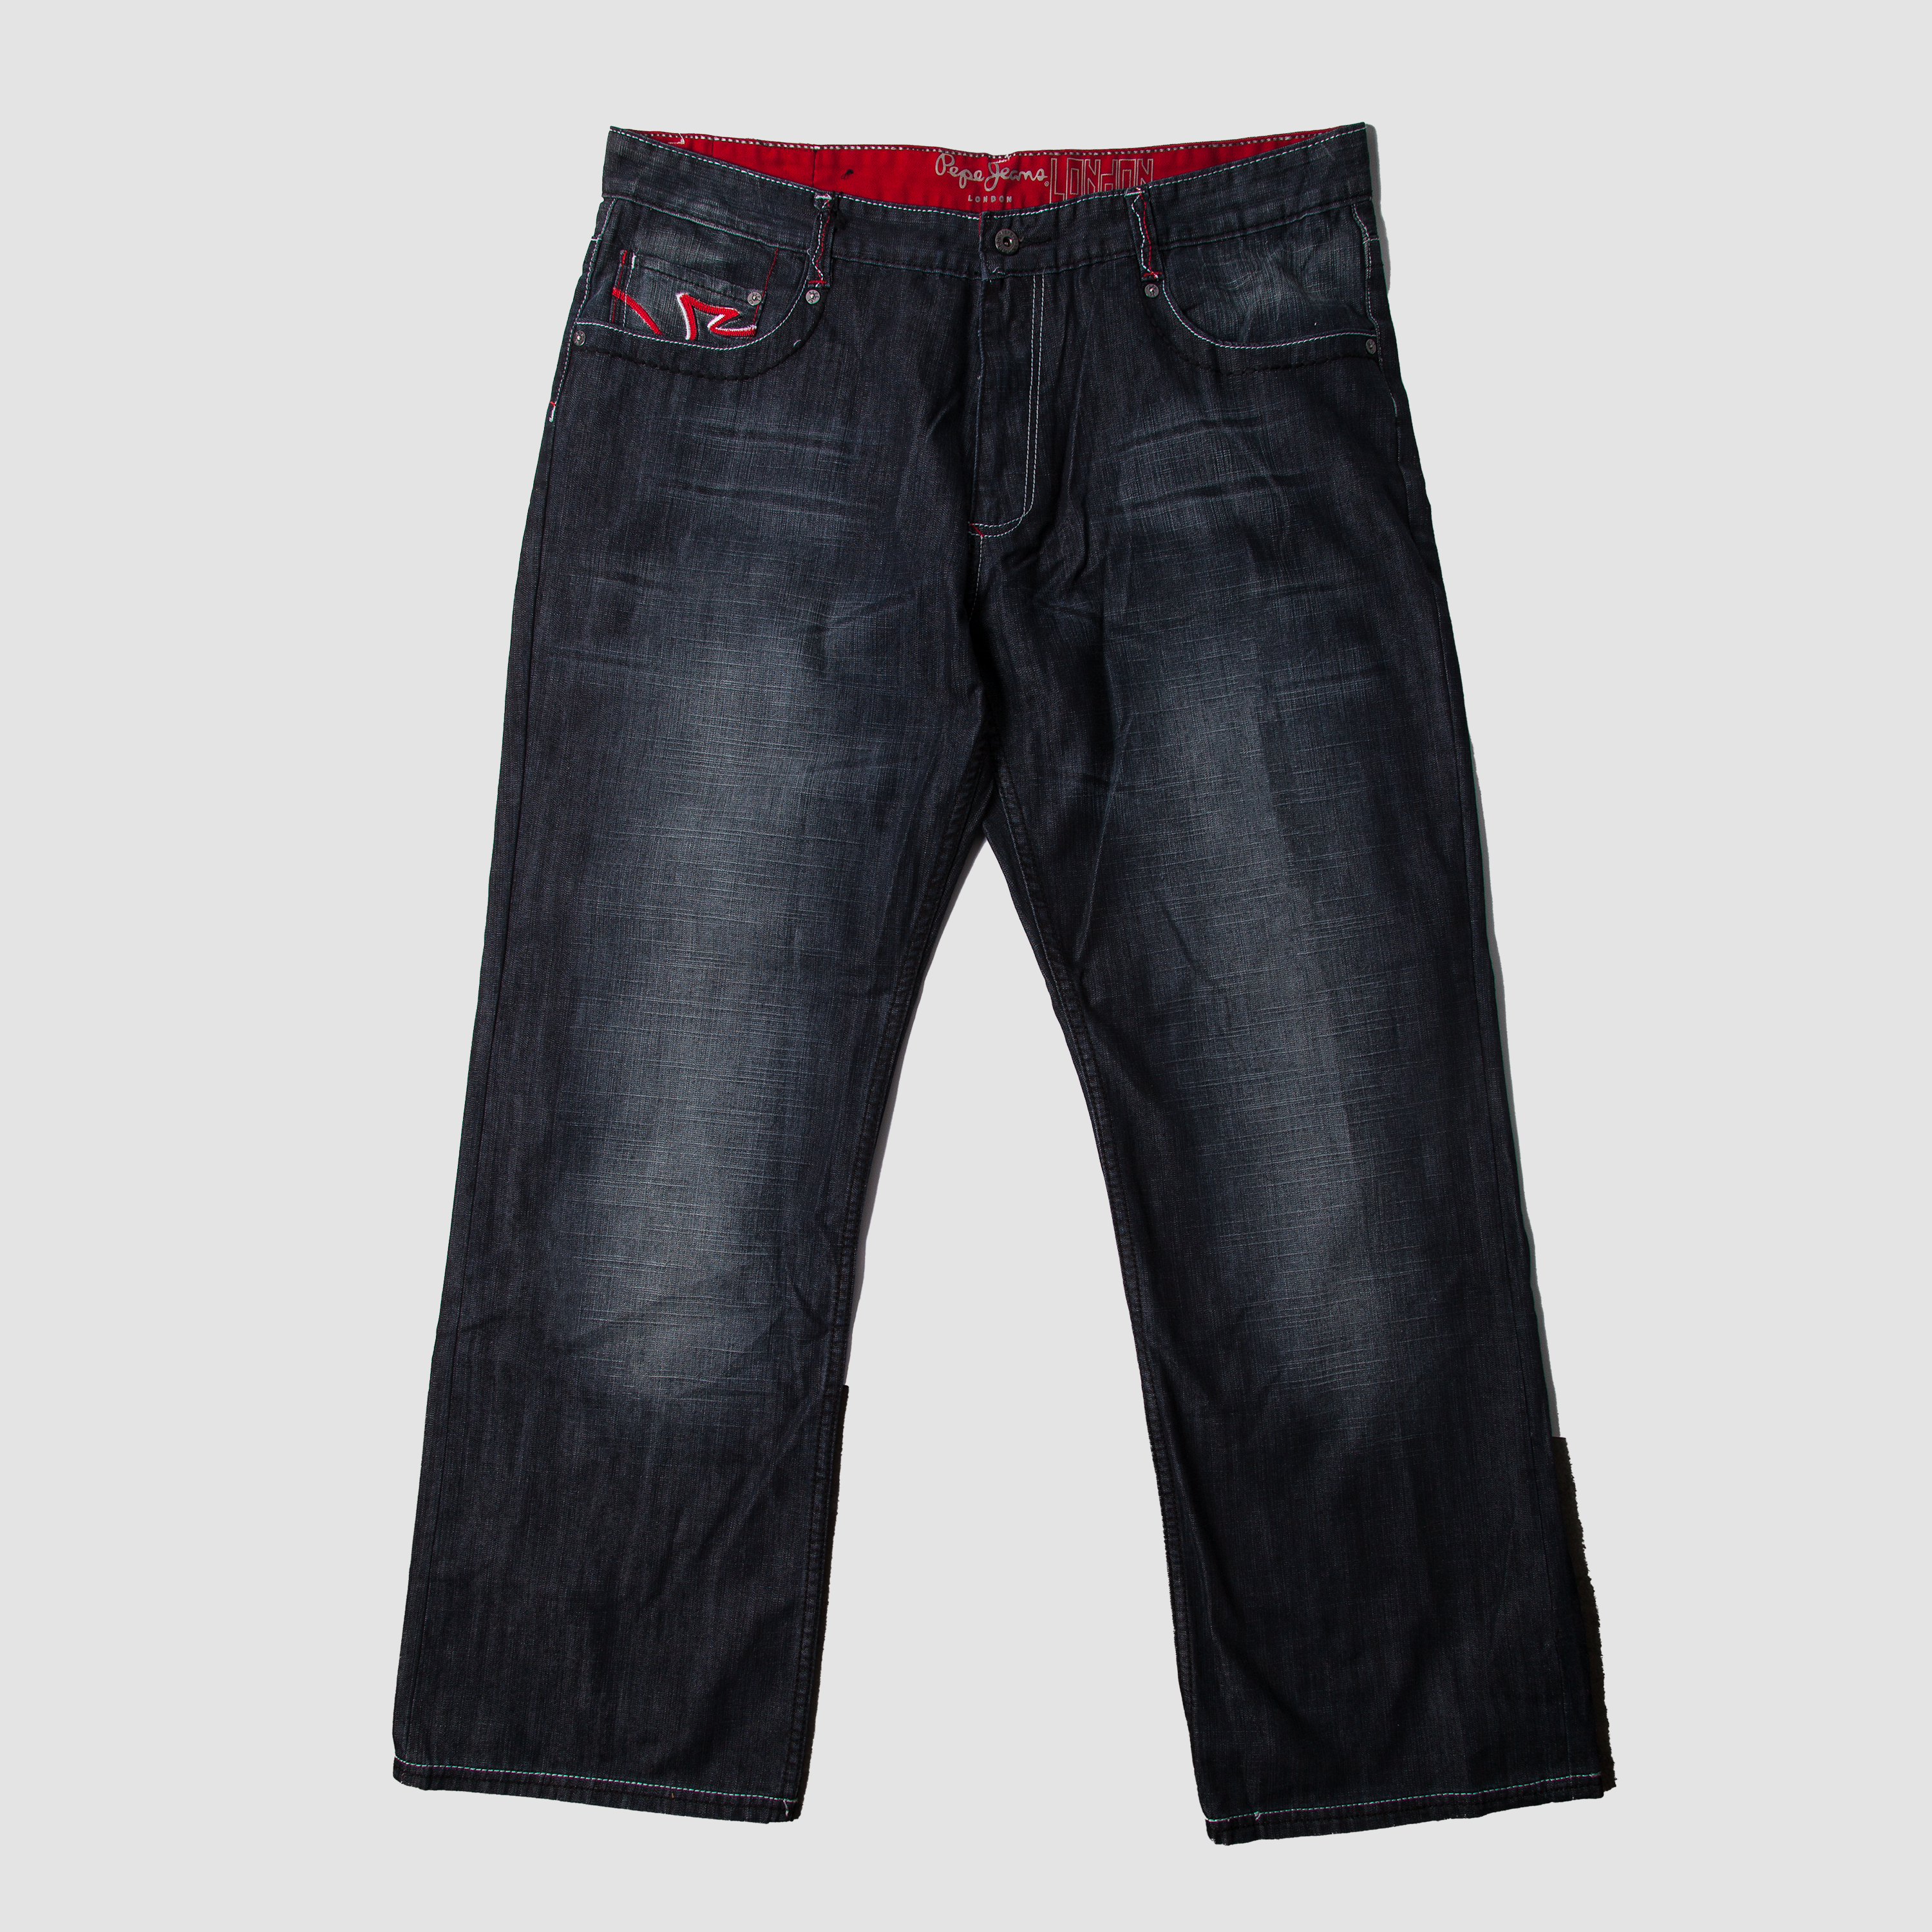 Pepe Jeans Men's Jeans for sale